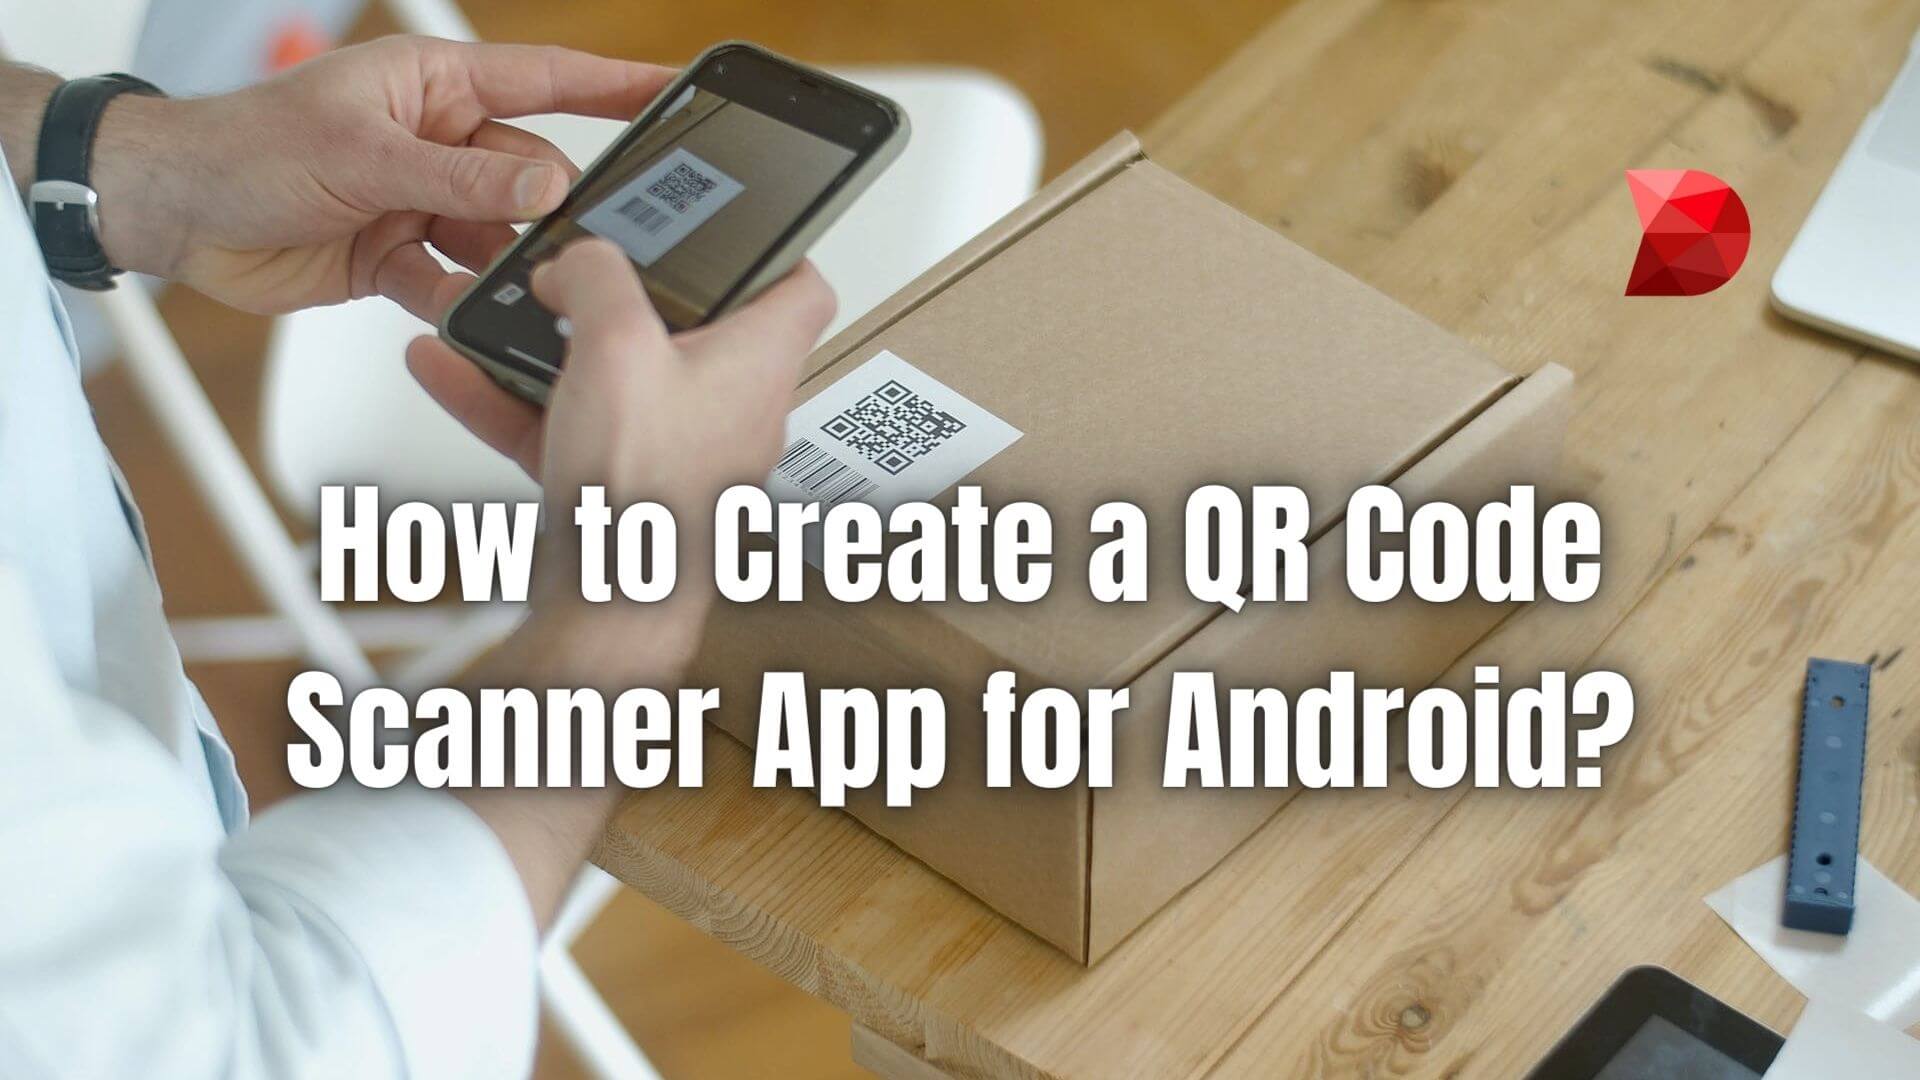 Discover the step-by-step process to create a top-notch QR code scanner app for Android. Click here to learn the essentials today!